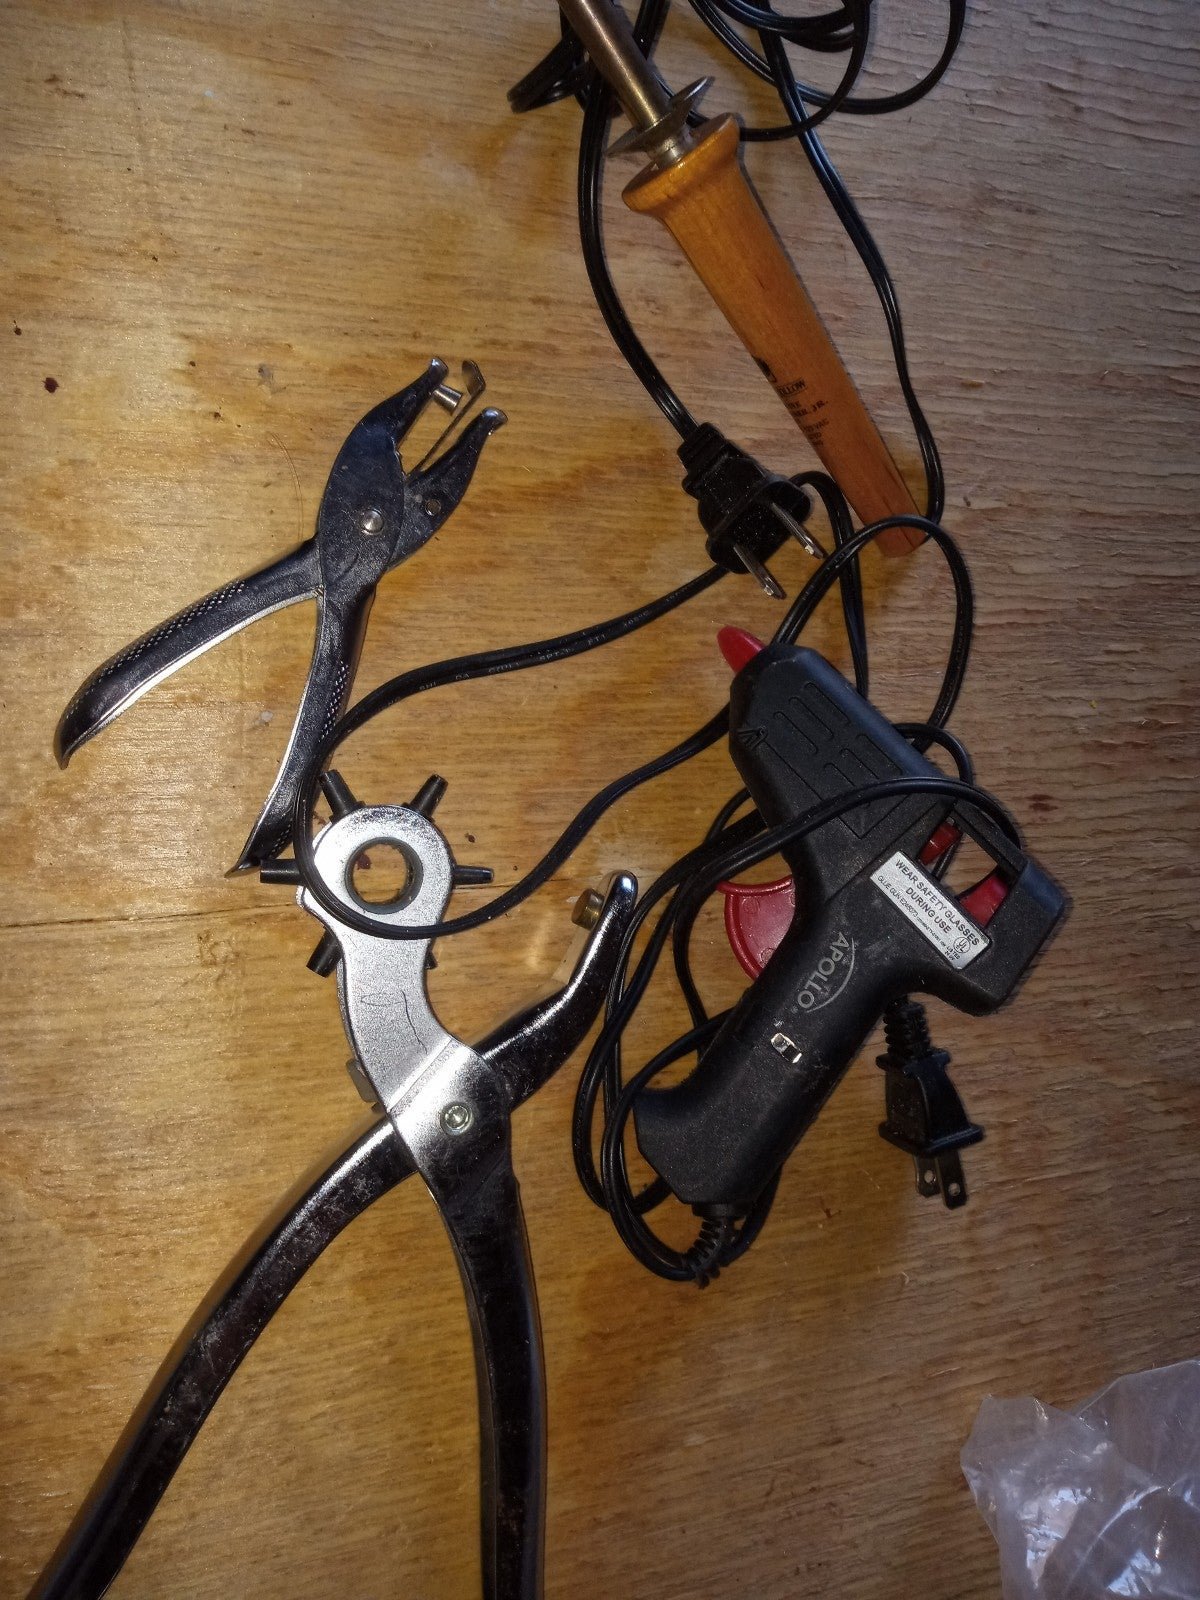 Hole punch, leather punch, glue gun and wood burner dnW